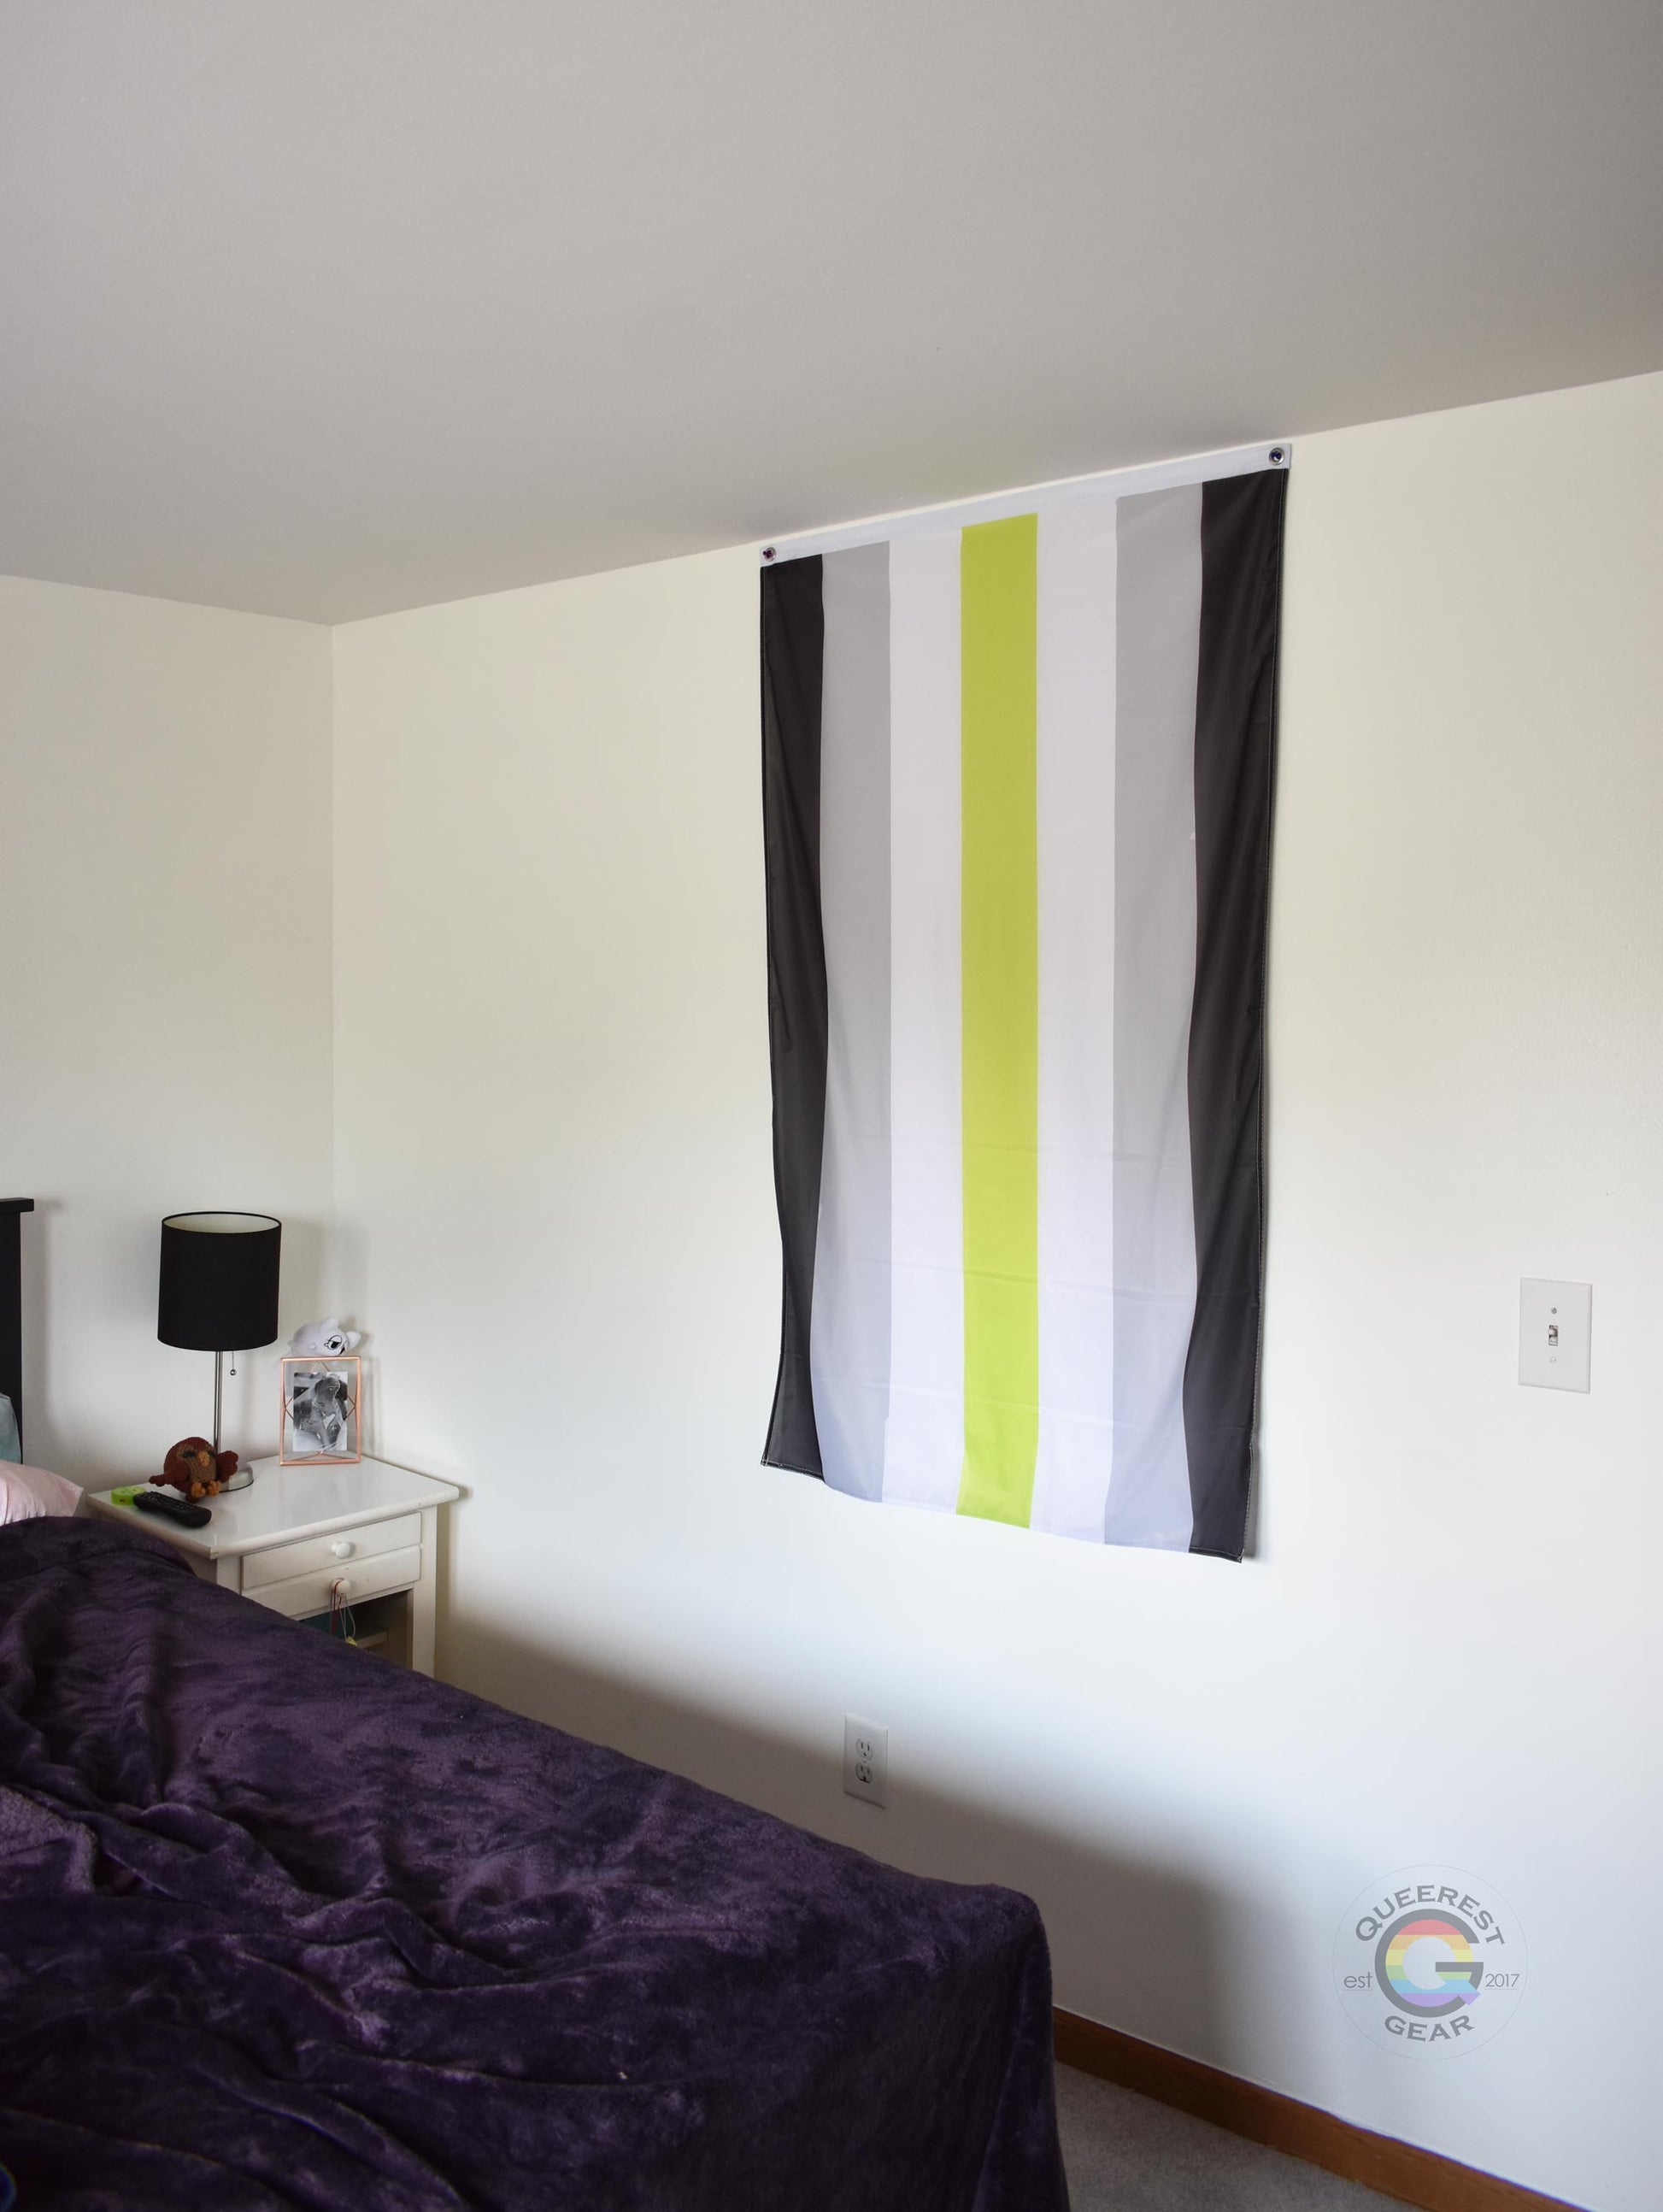 3’x5’ agender pride flag hanging vertically on the wall of a bedroom with a nightstand and a bed